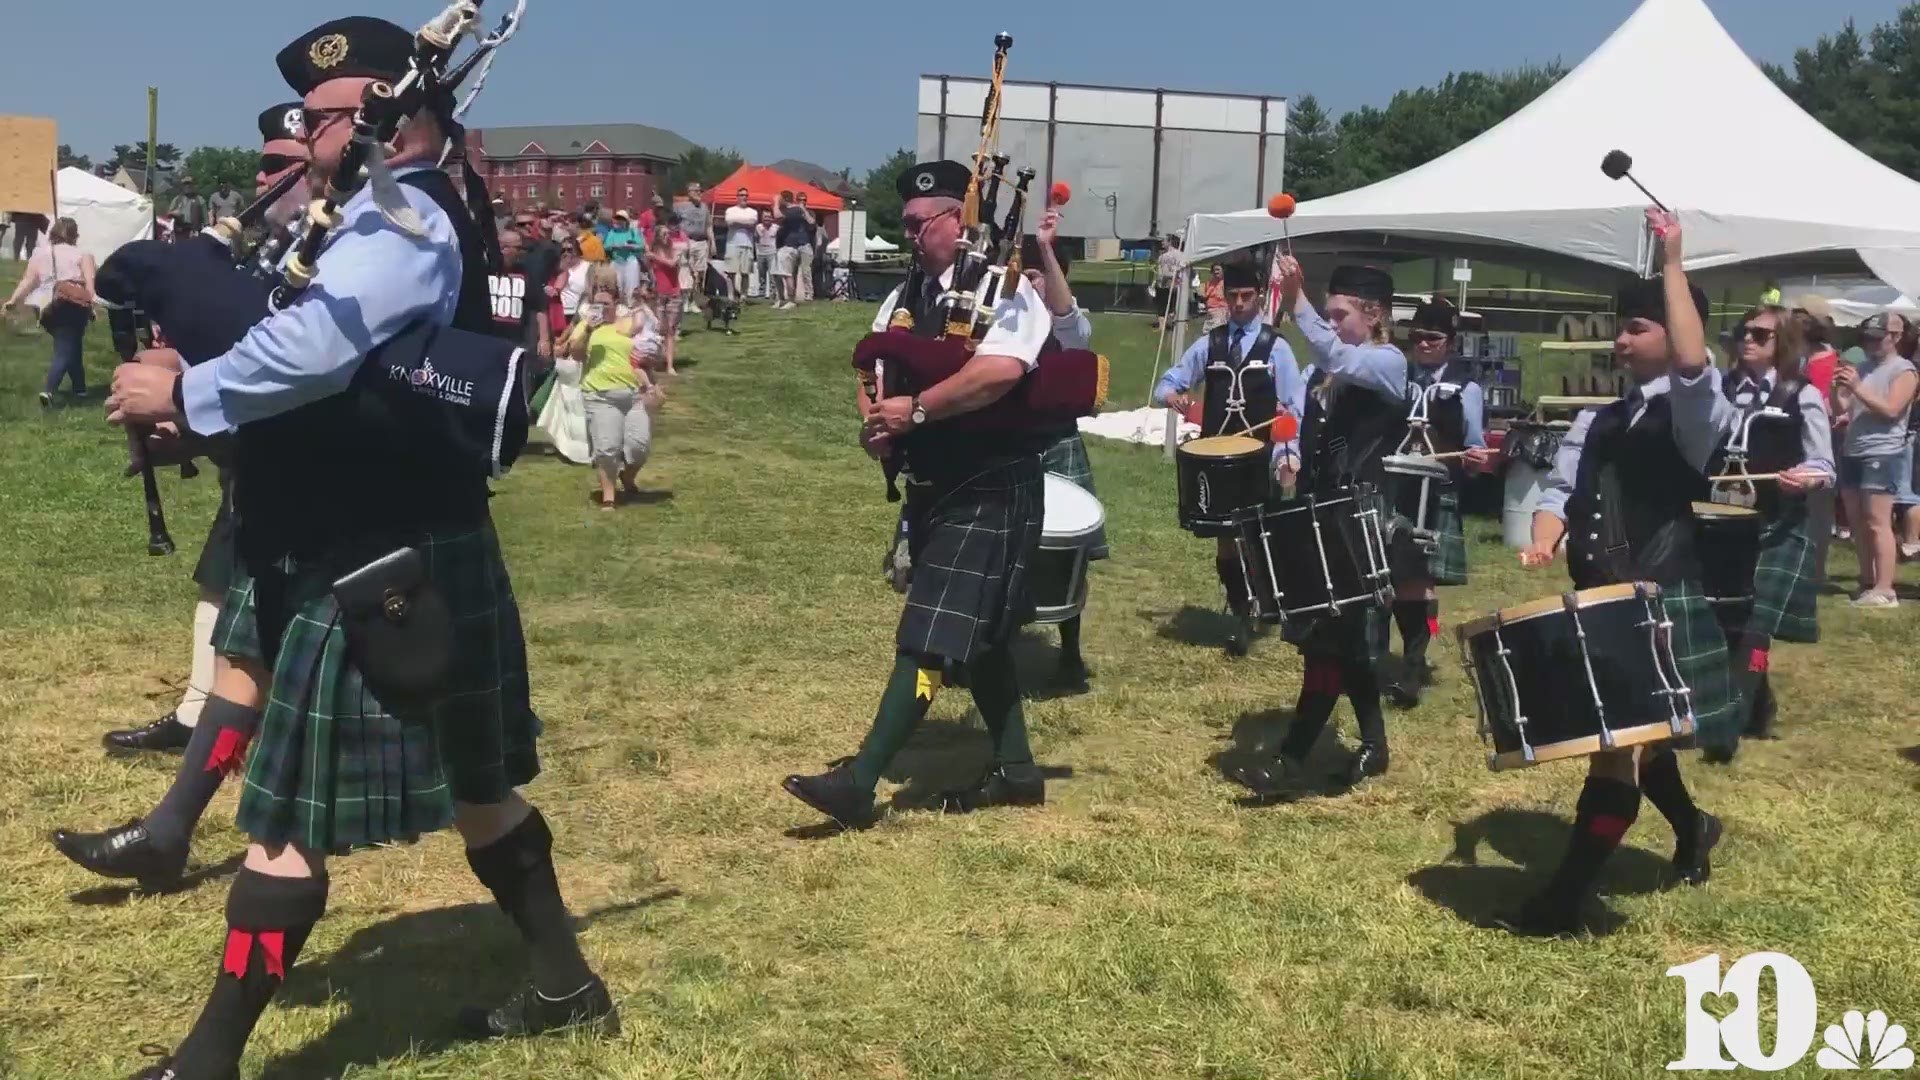 You can get a taste of the Highlands in the Smokies at the Smoky Mountain Scottish Festival and Games at Maryville College.